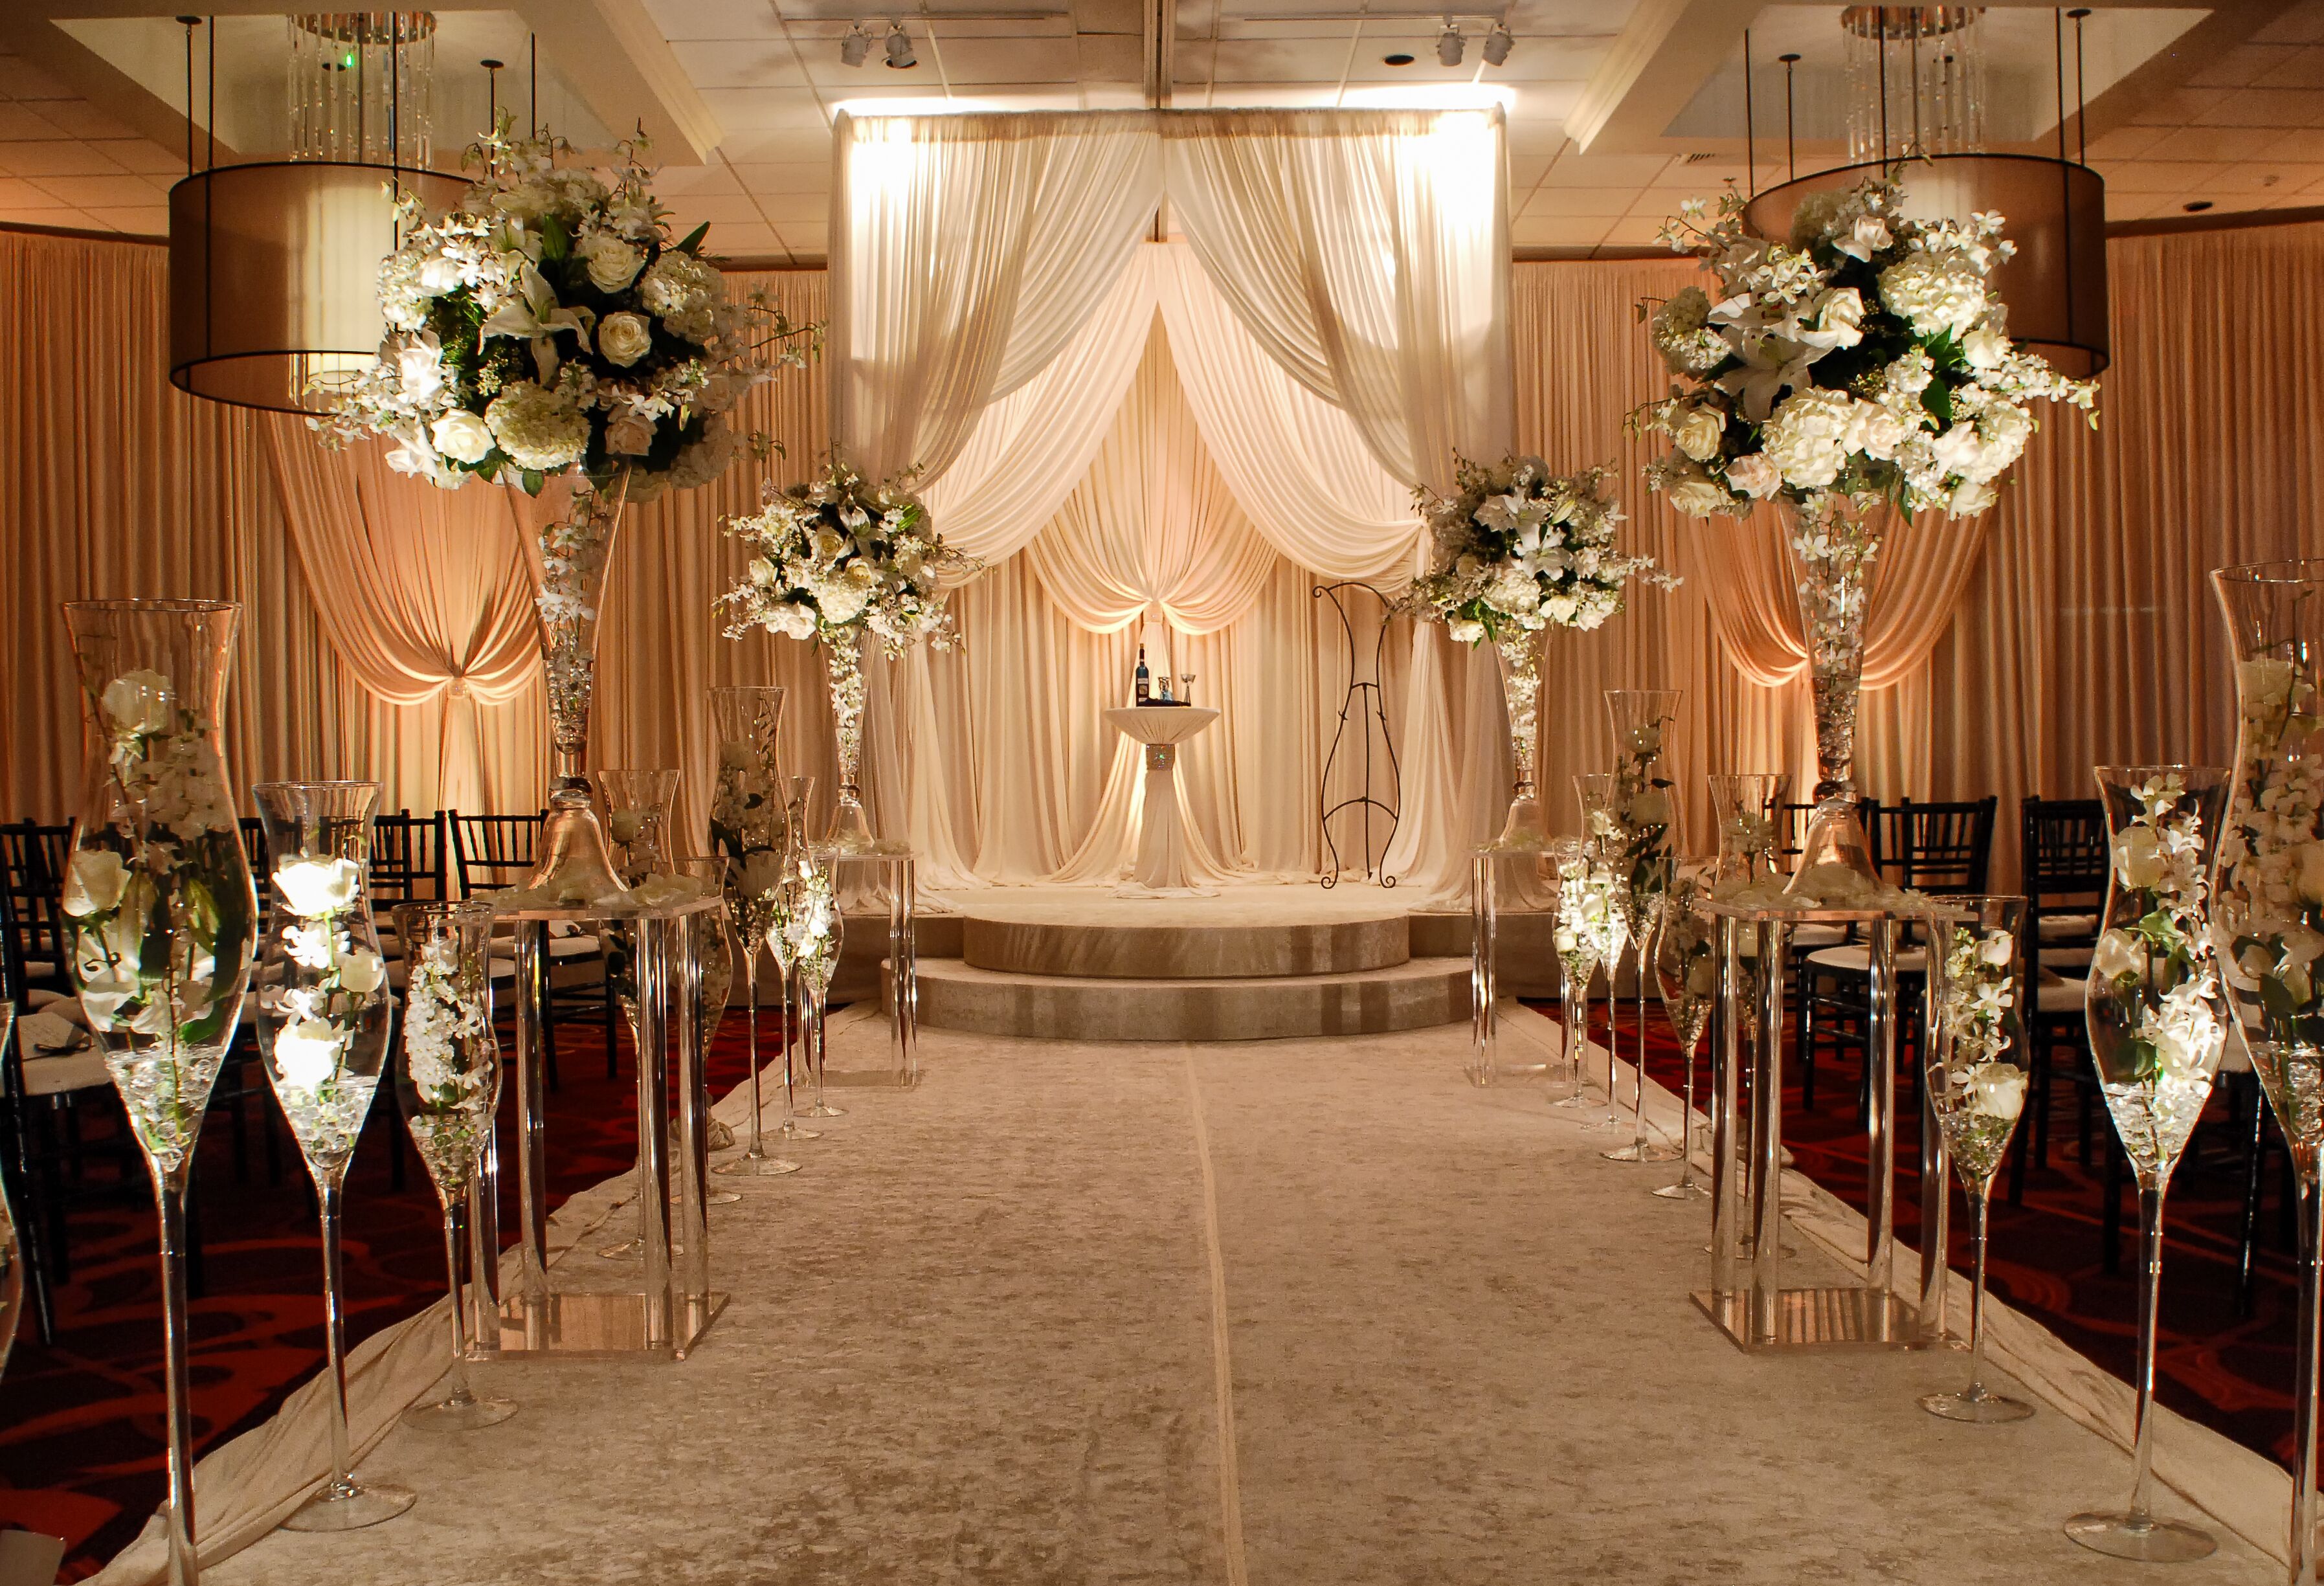 Top Wedding Reception Venues In Illinois in 2023 The ultimate guide 